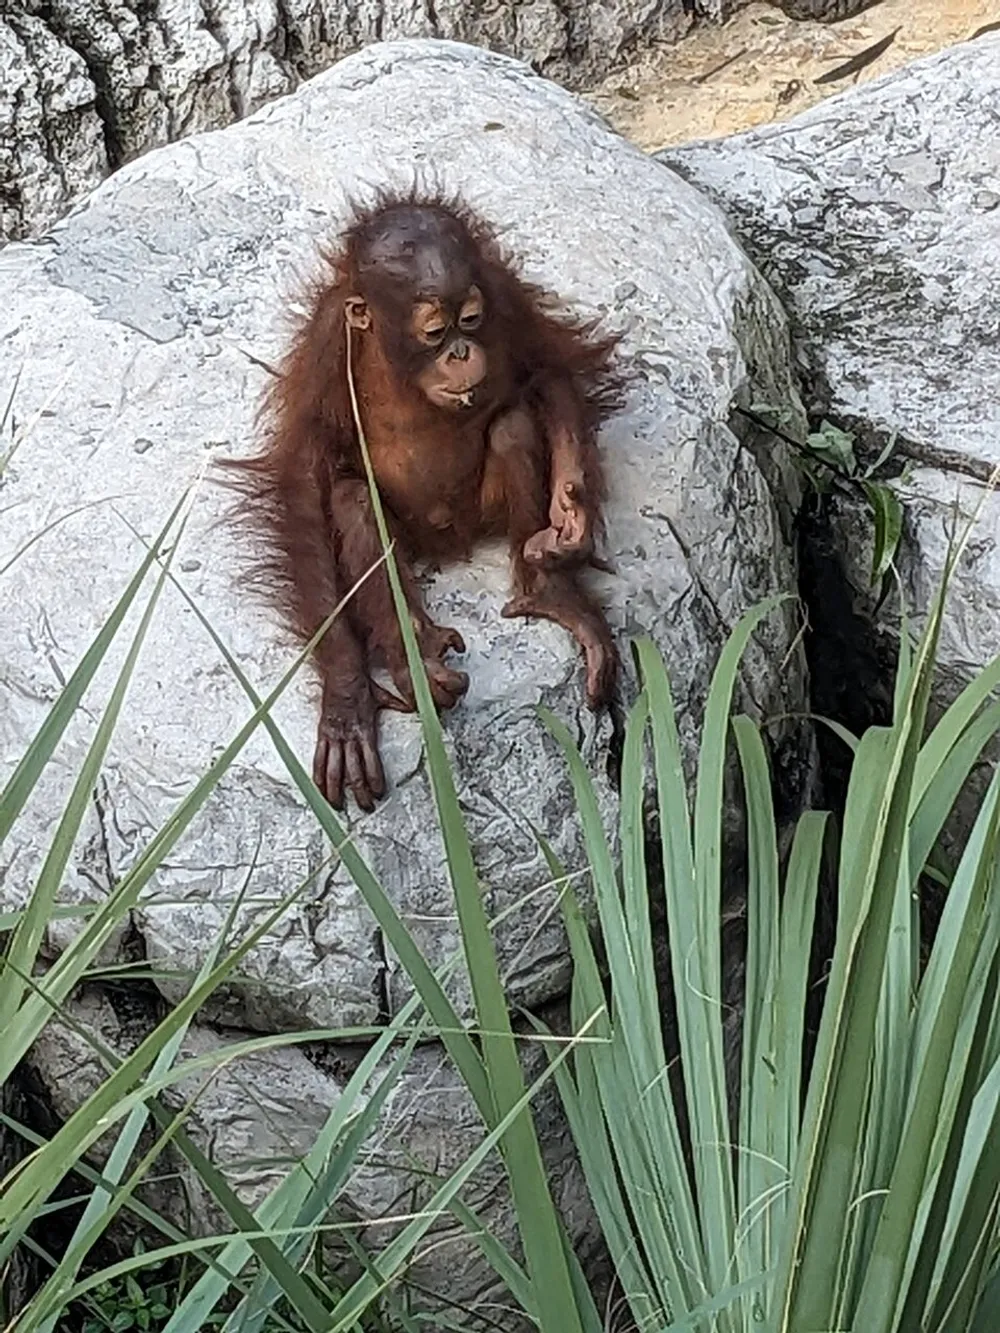 A young orangutan is sitting leisurely on a large rock surrounded by green foliage